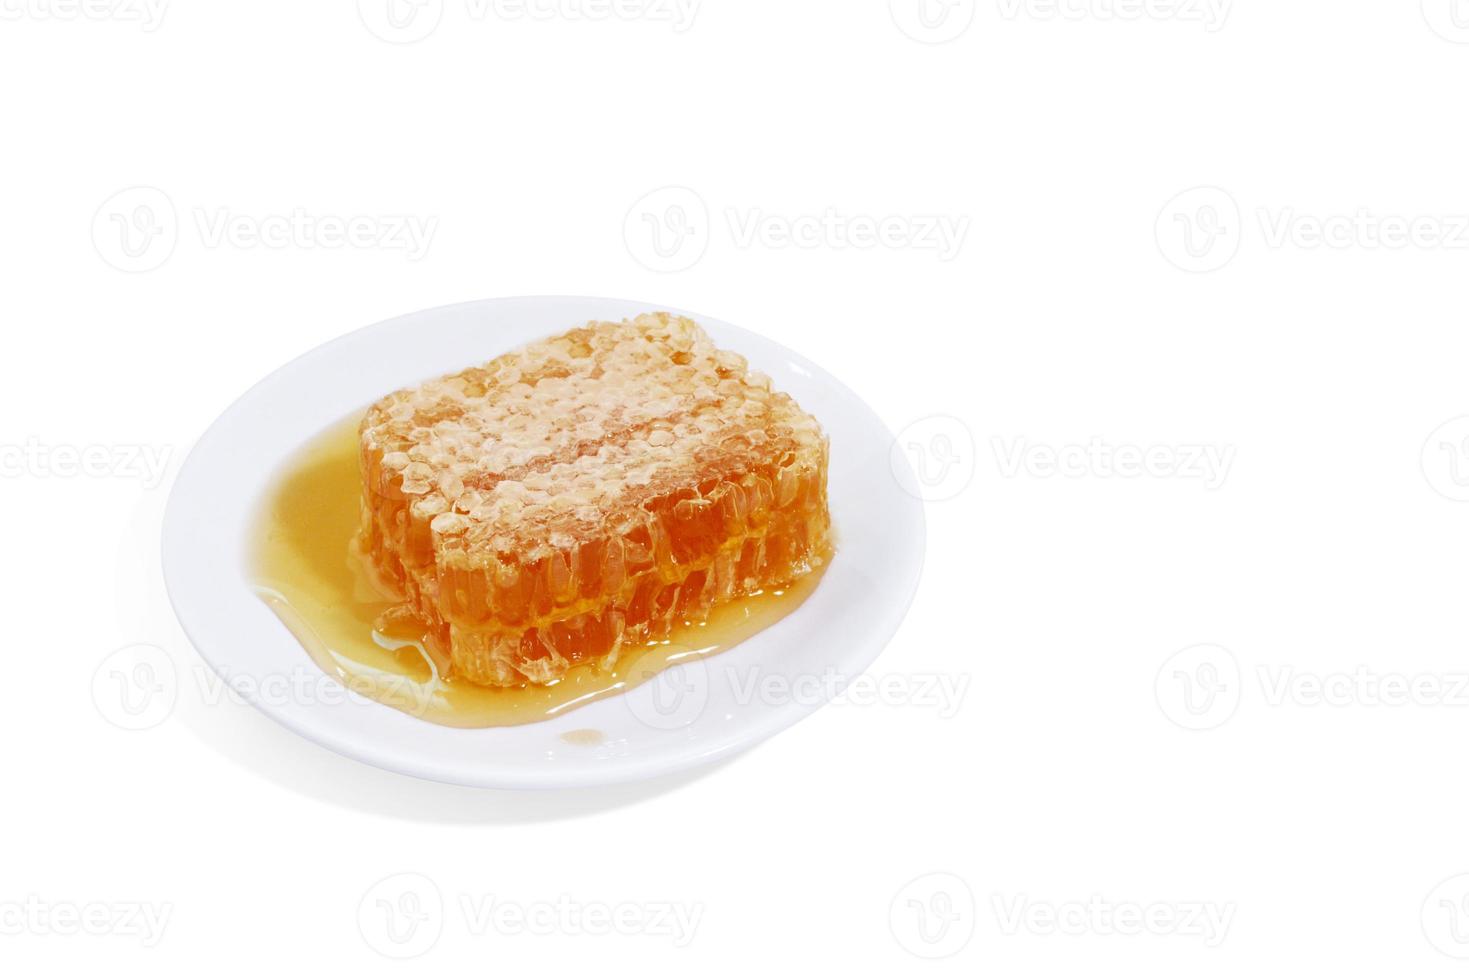 beeswax honeycomb yellow natural honey slices on white plate isolated on white background photo